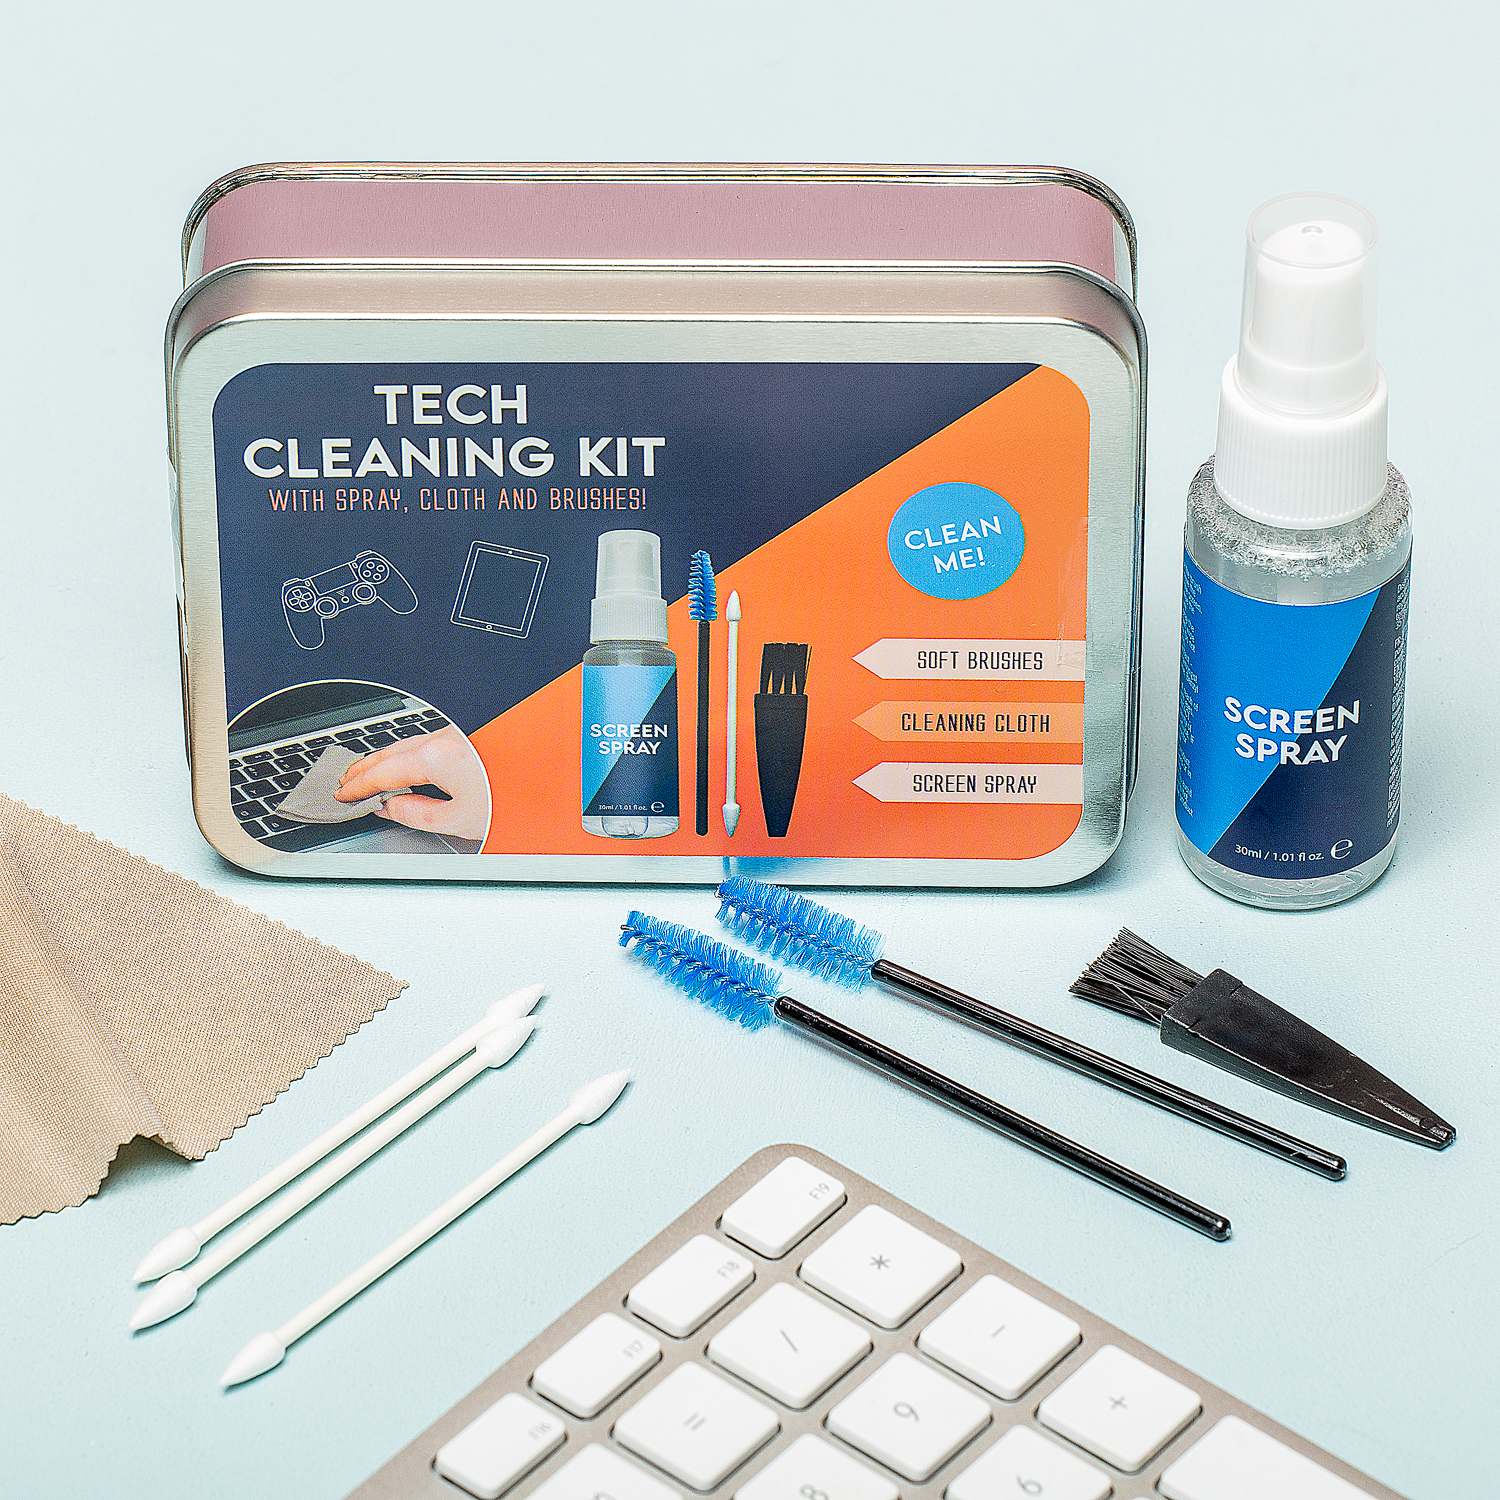 Tech Cleaning Kit